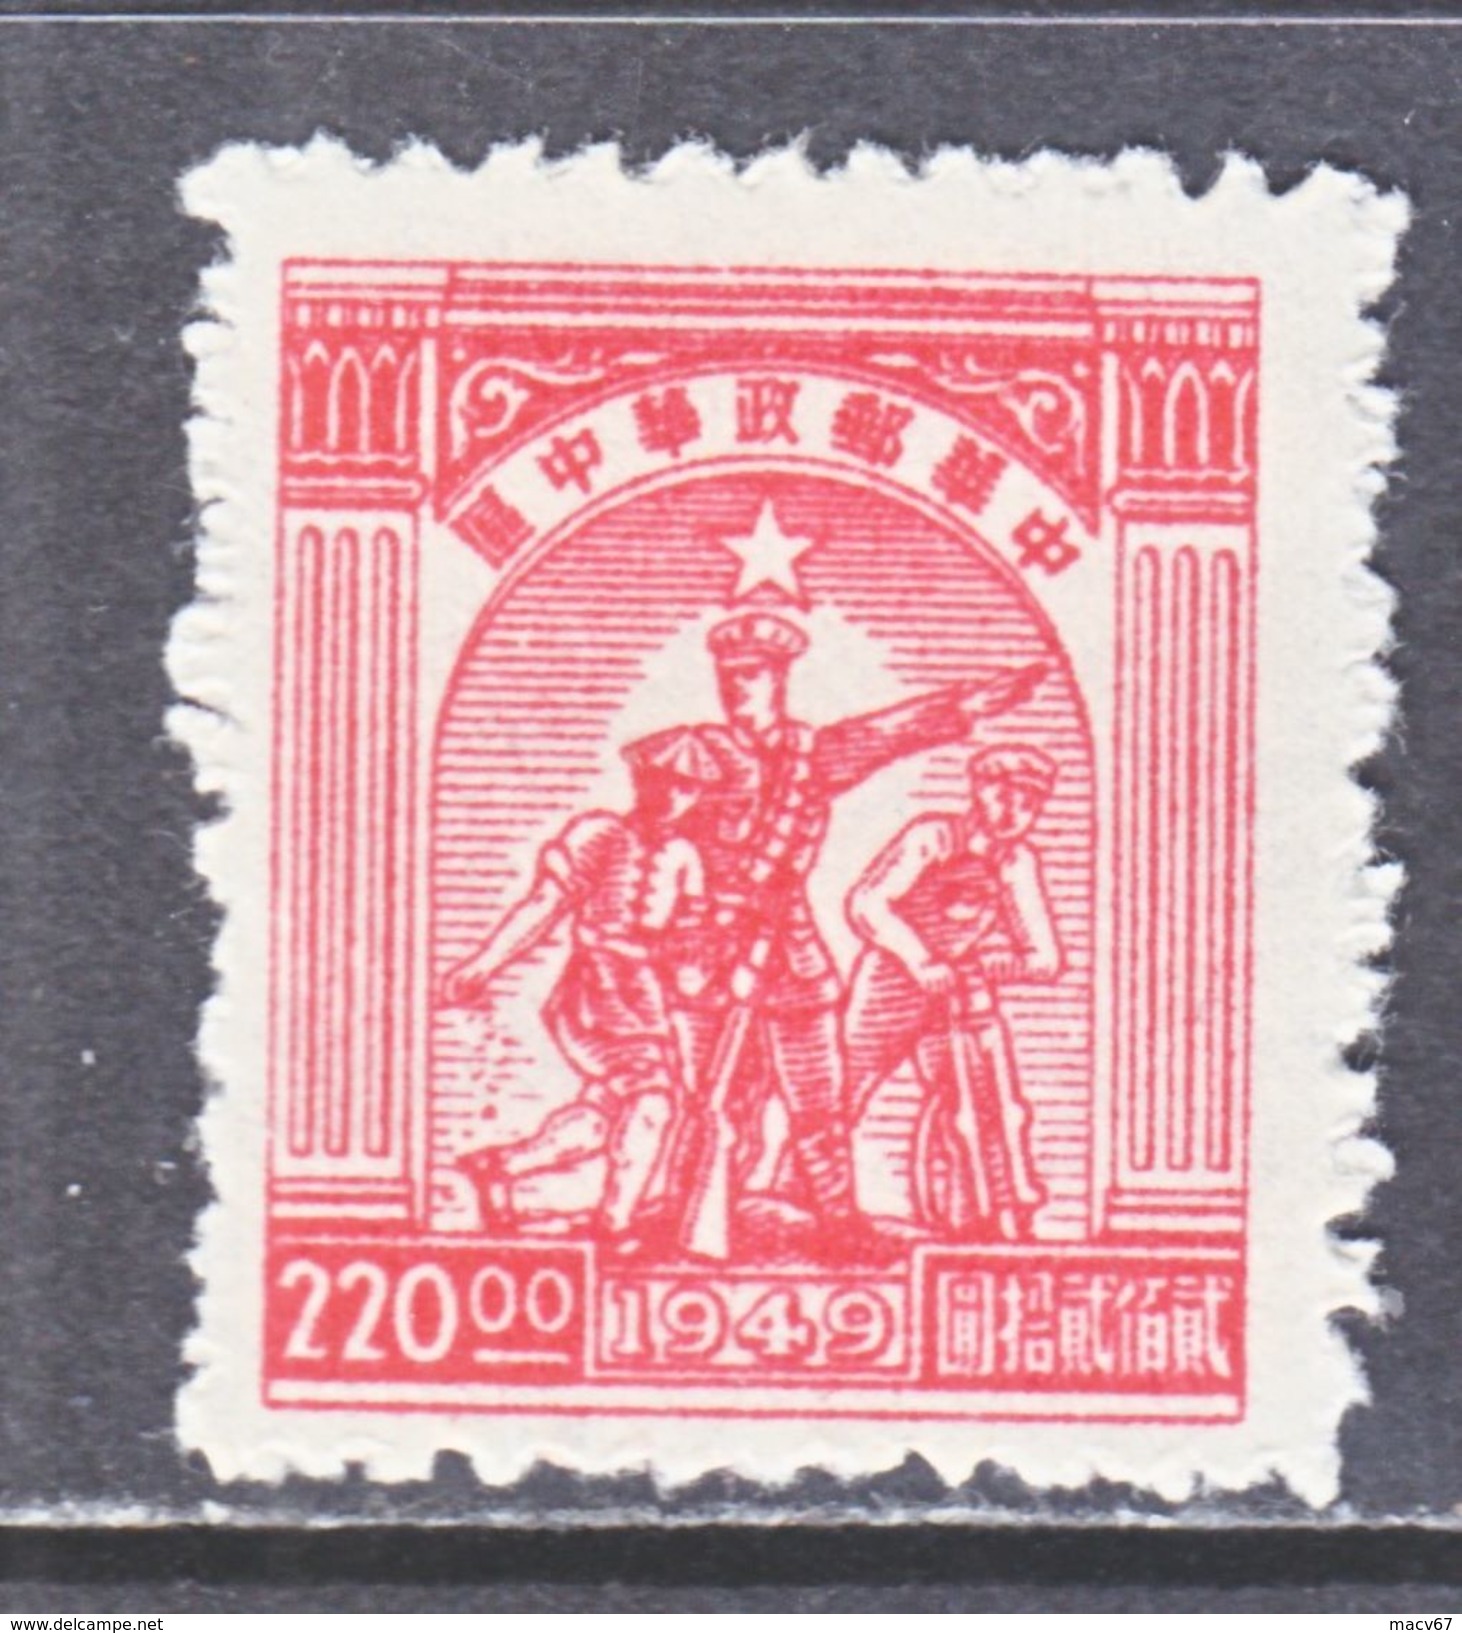 PRC  CENTRAL  CHINA  6 L 46  * - Central China 1948-49